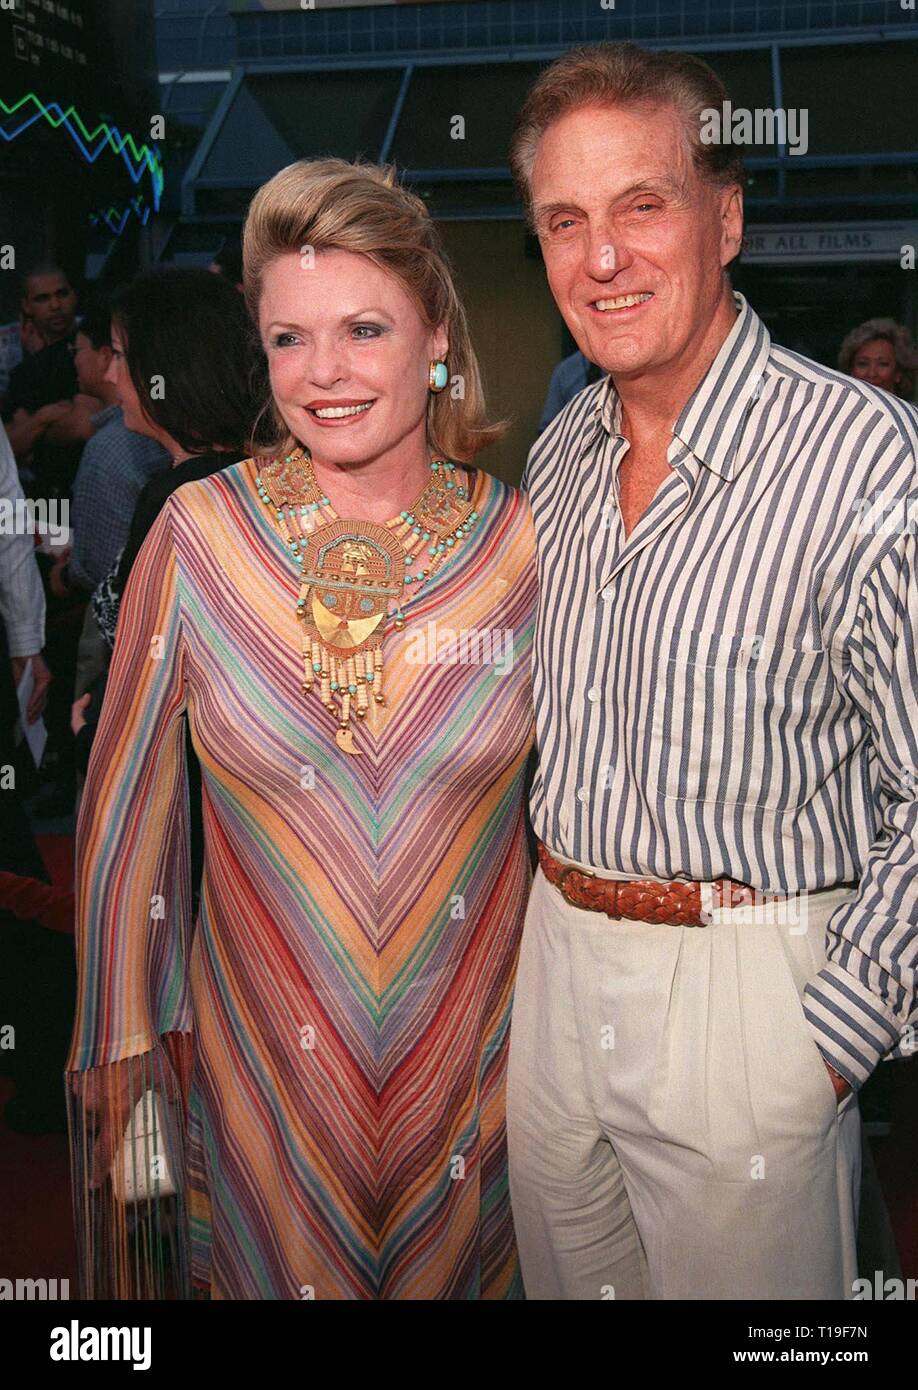 LOS ANGELES, CA - July 29, 1998:  Actor ROBERT STACK & wife ROSEMARY at the premiere of 'BASEketball' at Universal Studios. He stars in the movie with Jenny McCarthy, Yasmine Bleeth, Trey Parker & Matt Stone. Stock Photo